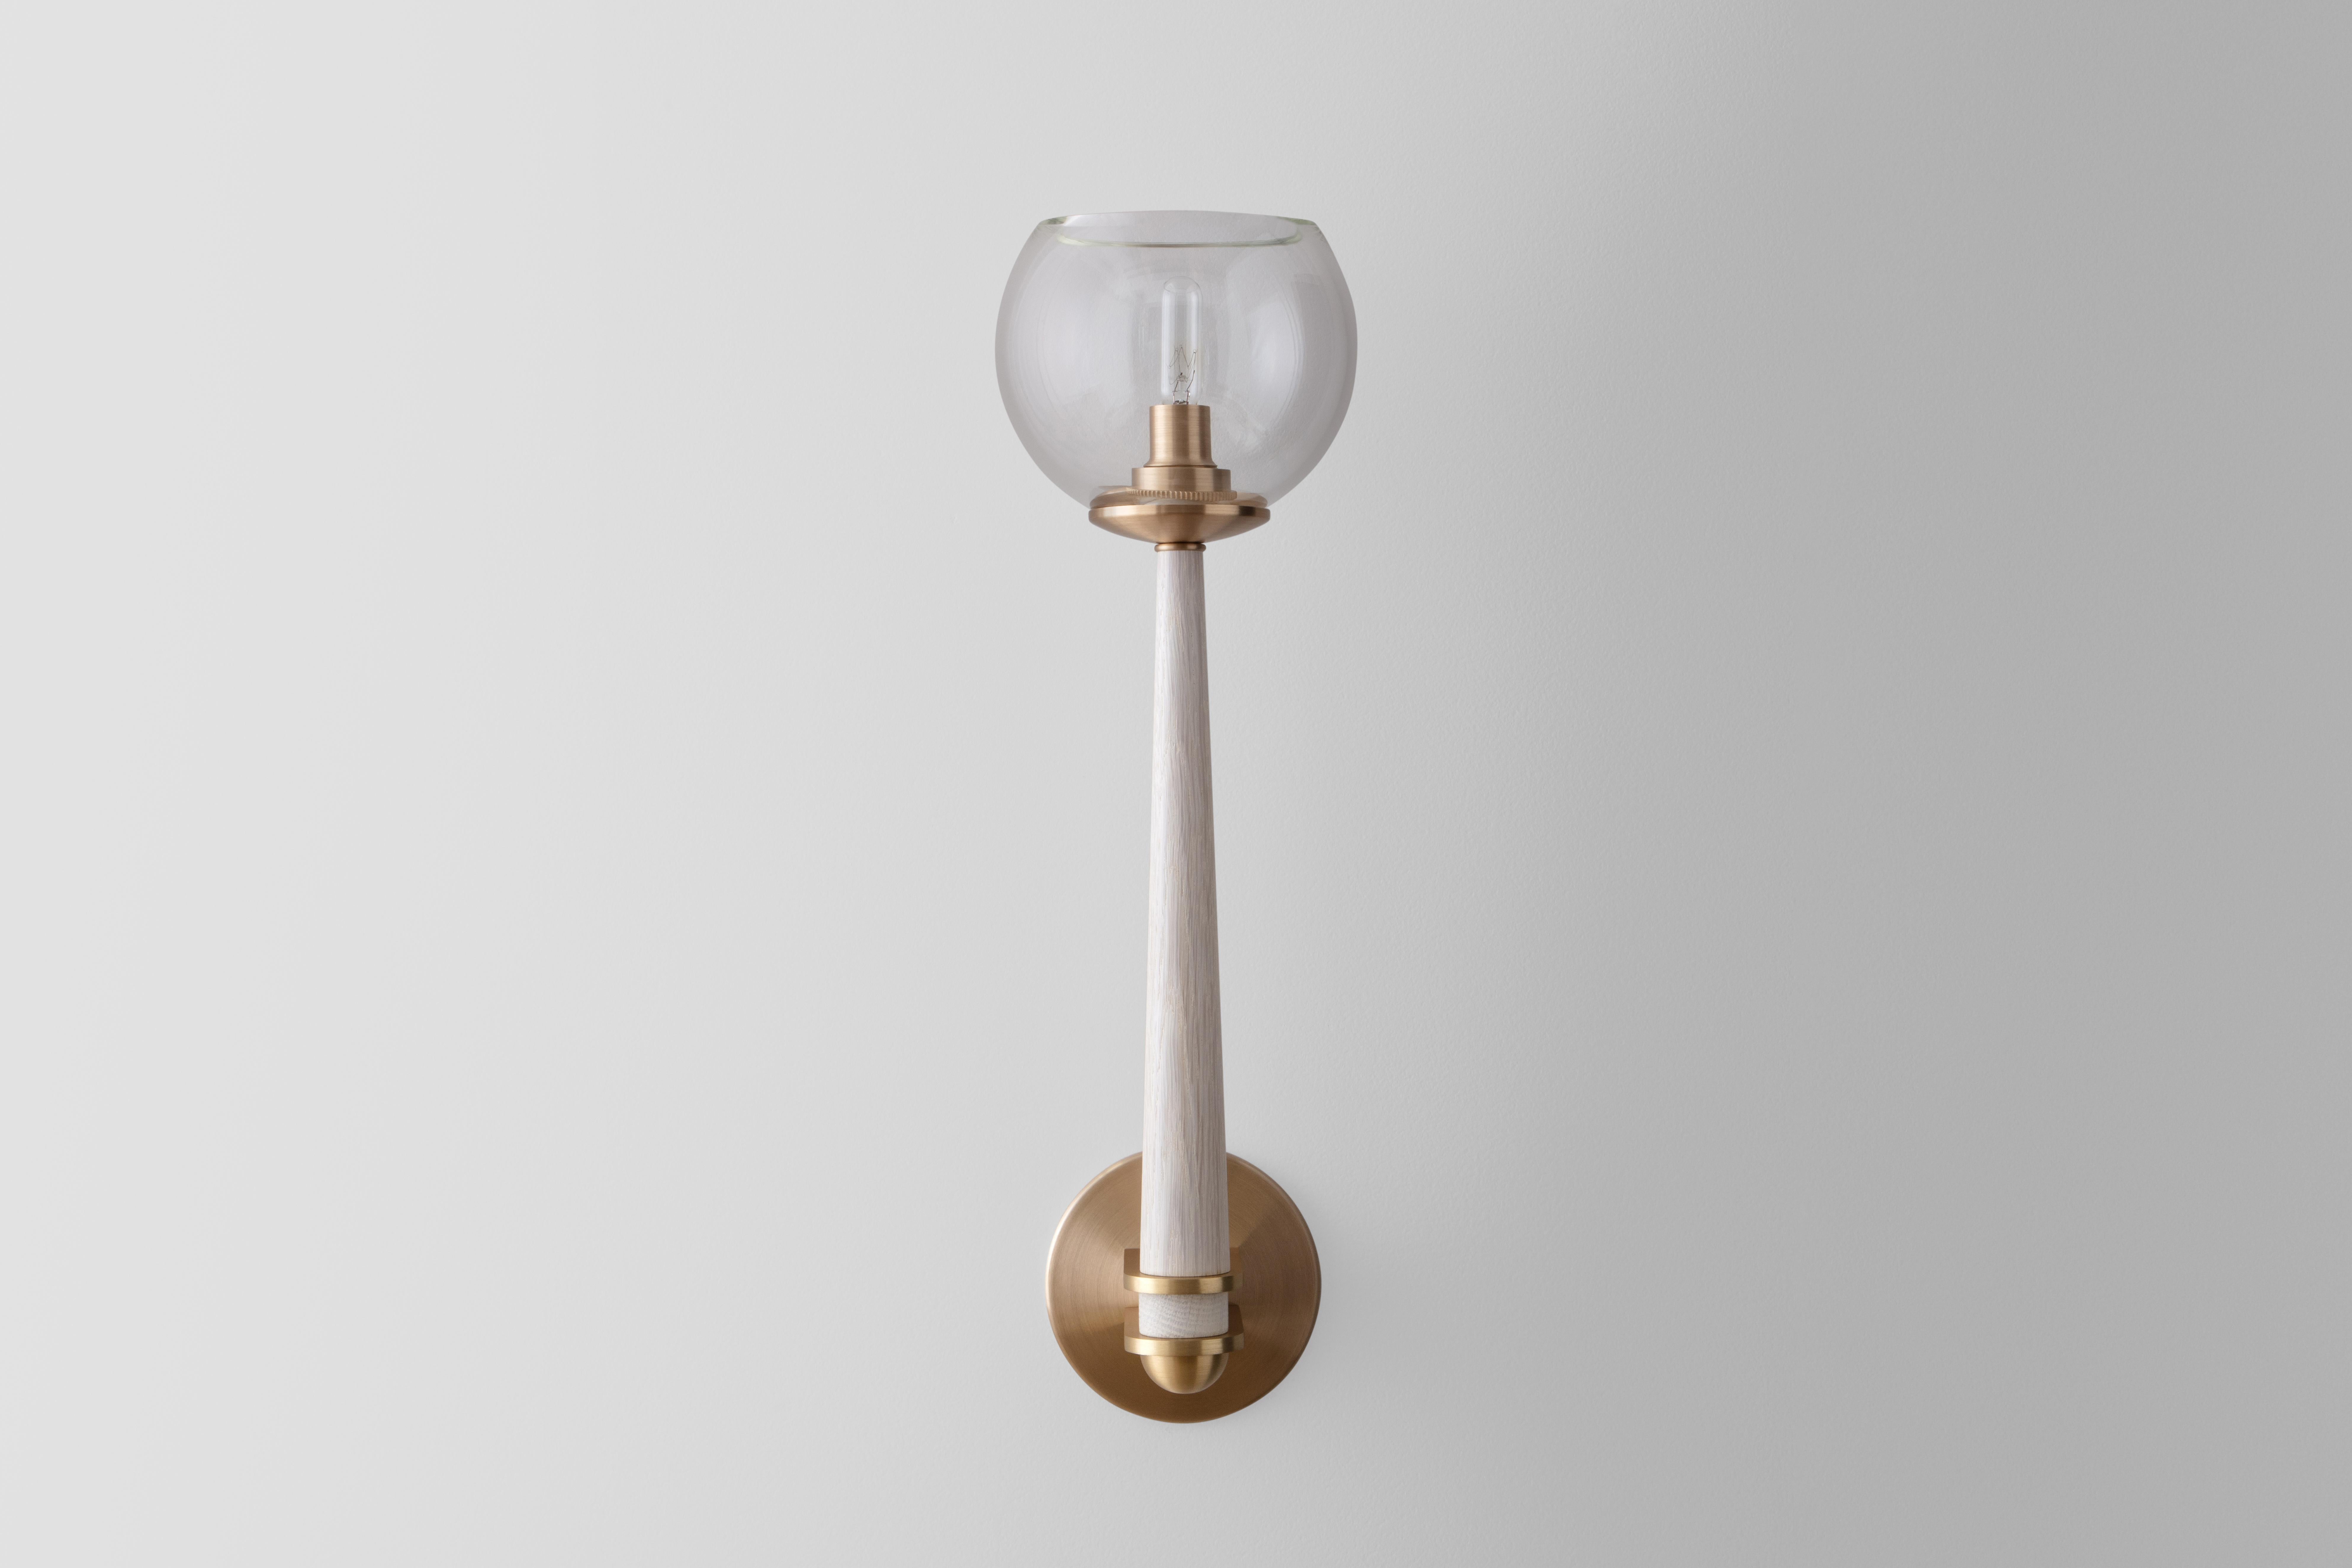 American Giotto Sconce (Classic) in Oak and Brass Finishes by Matthew Fairbank For Sale